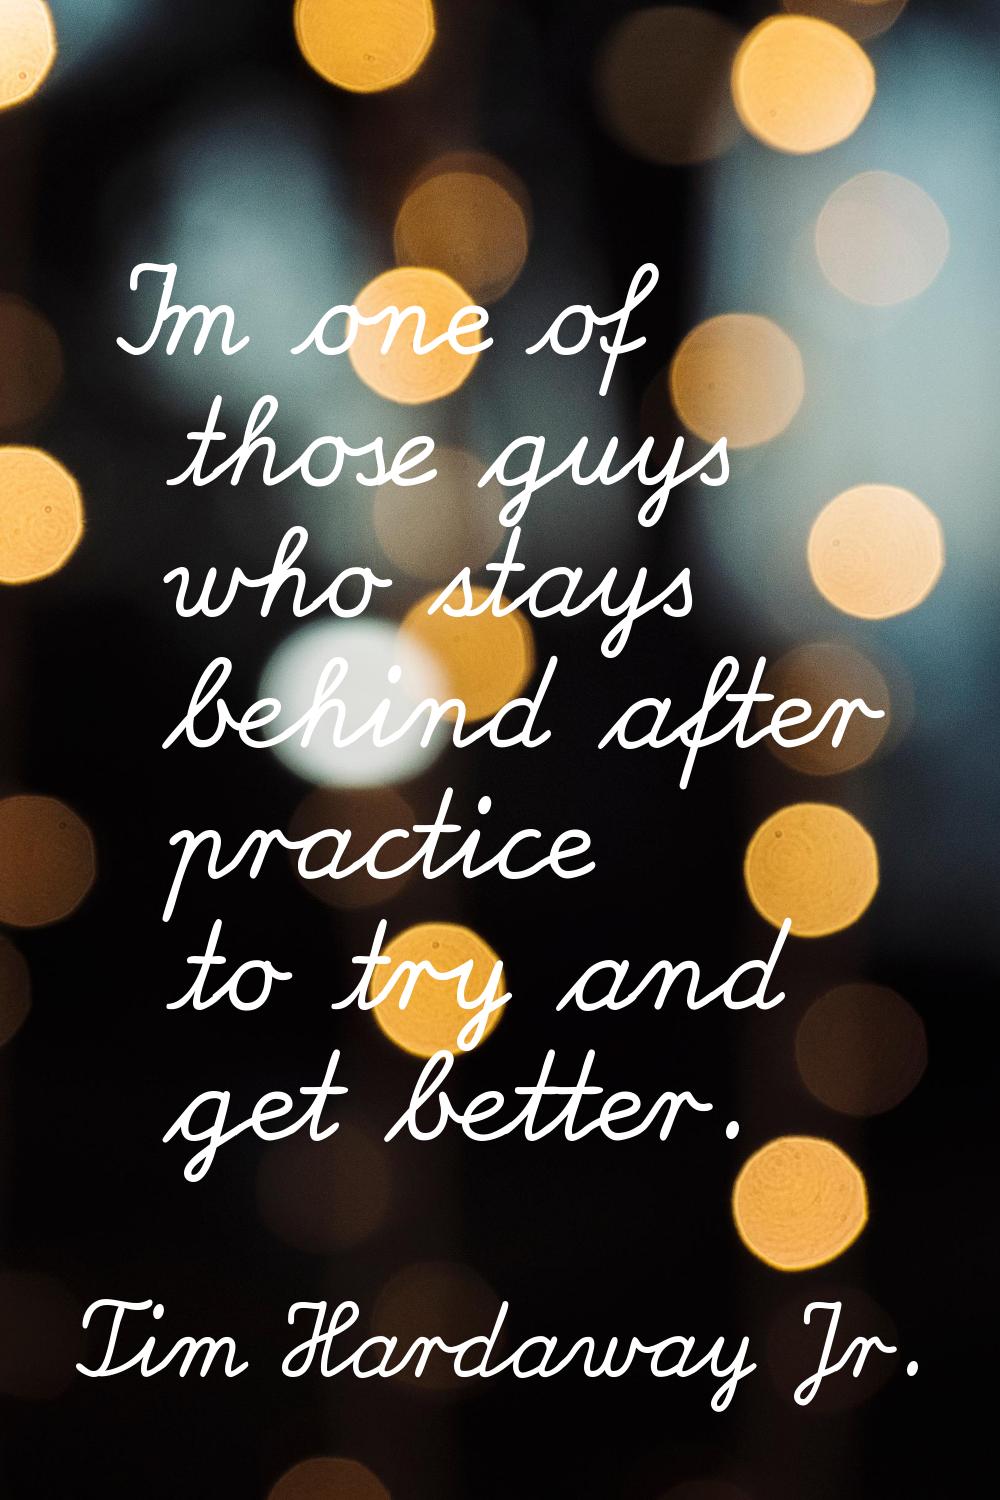 I'm one of those guys who stays behind after practice to try and get better.